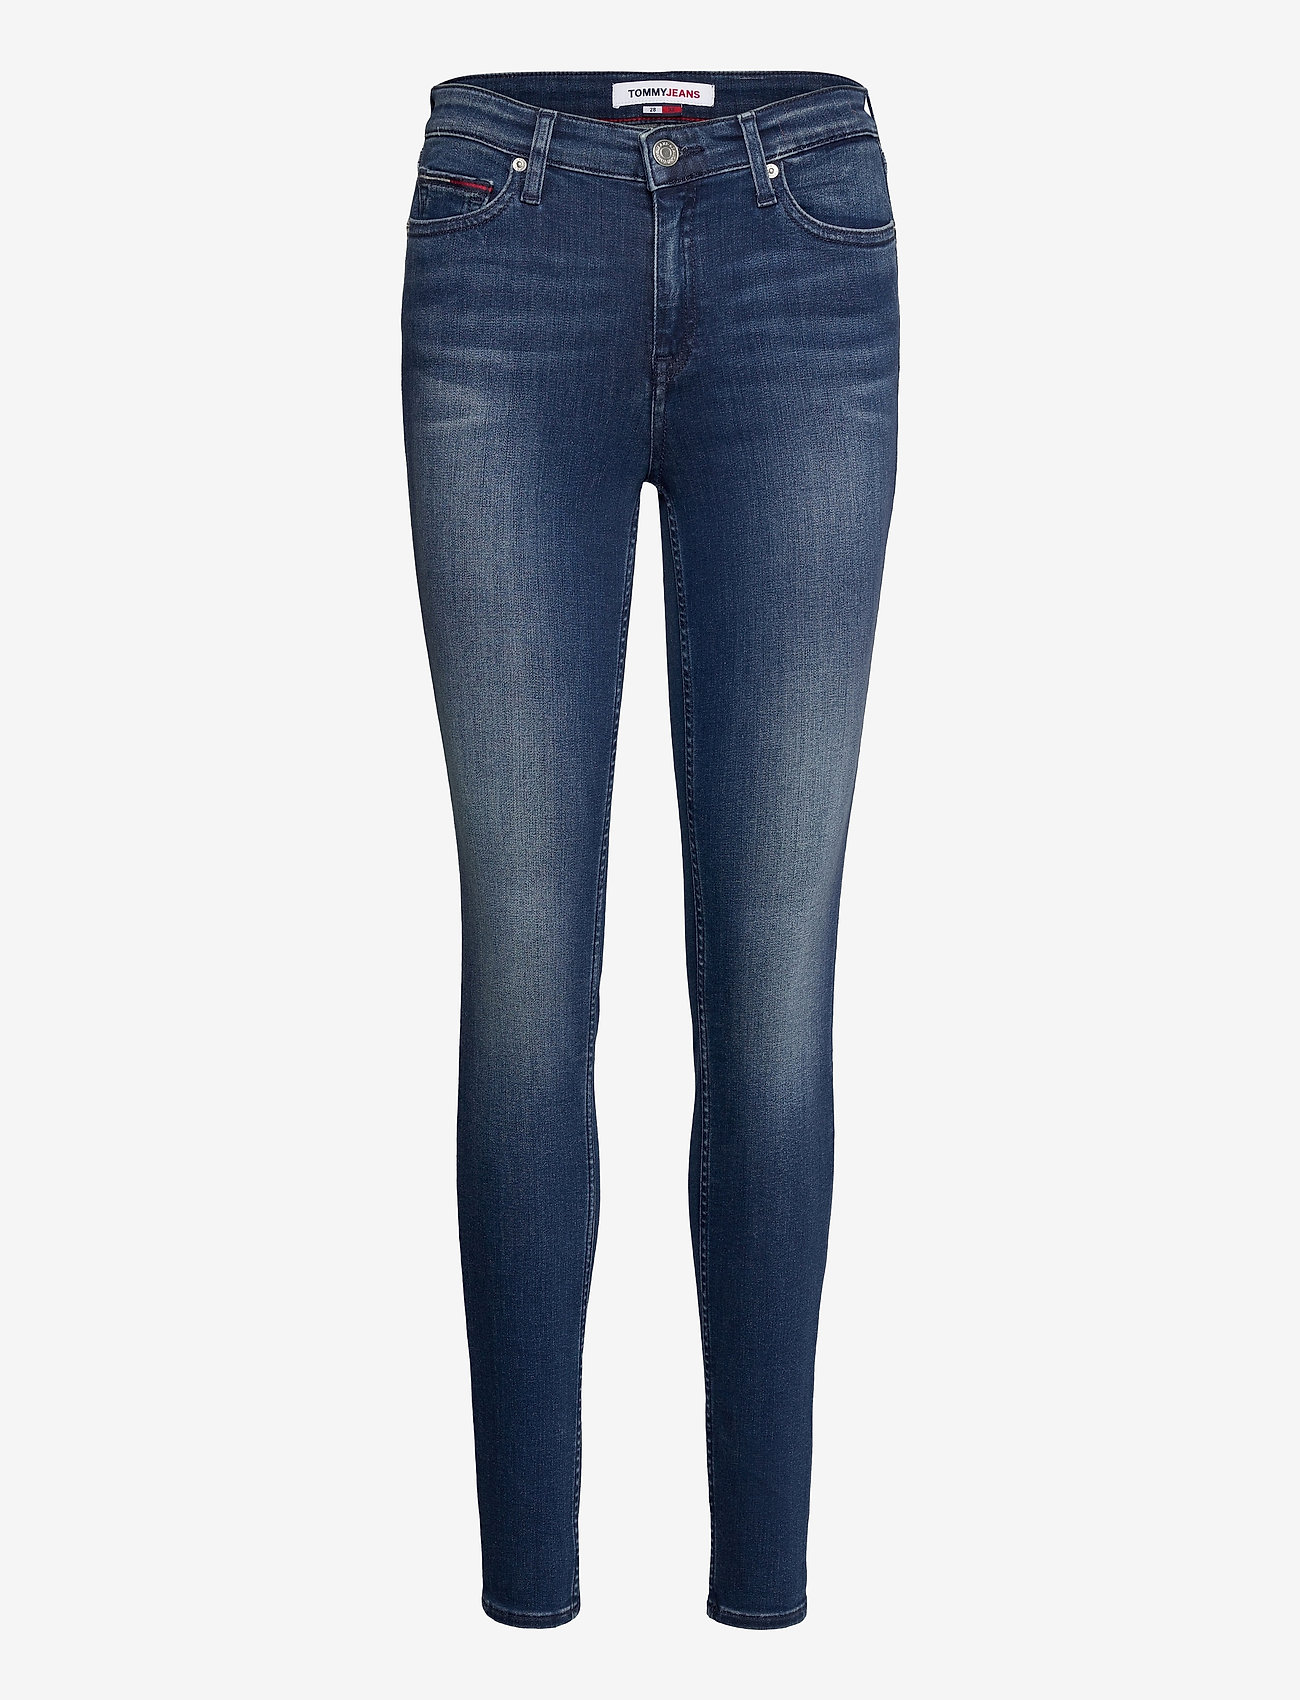 Tommy Jeans - NORA MR SKNY NNMBS - dżinsy skinny fit - new niceville mid blue stretch - 0